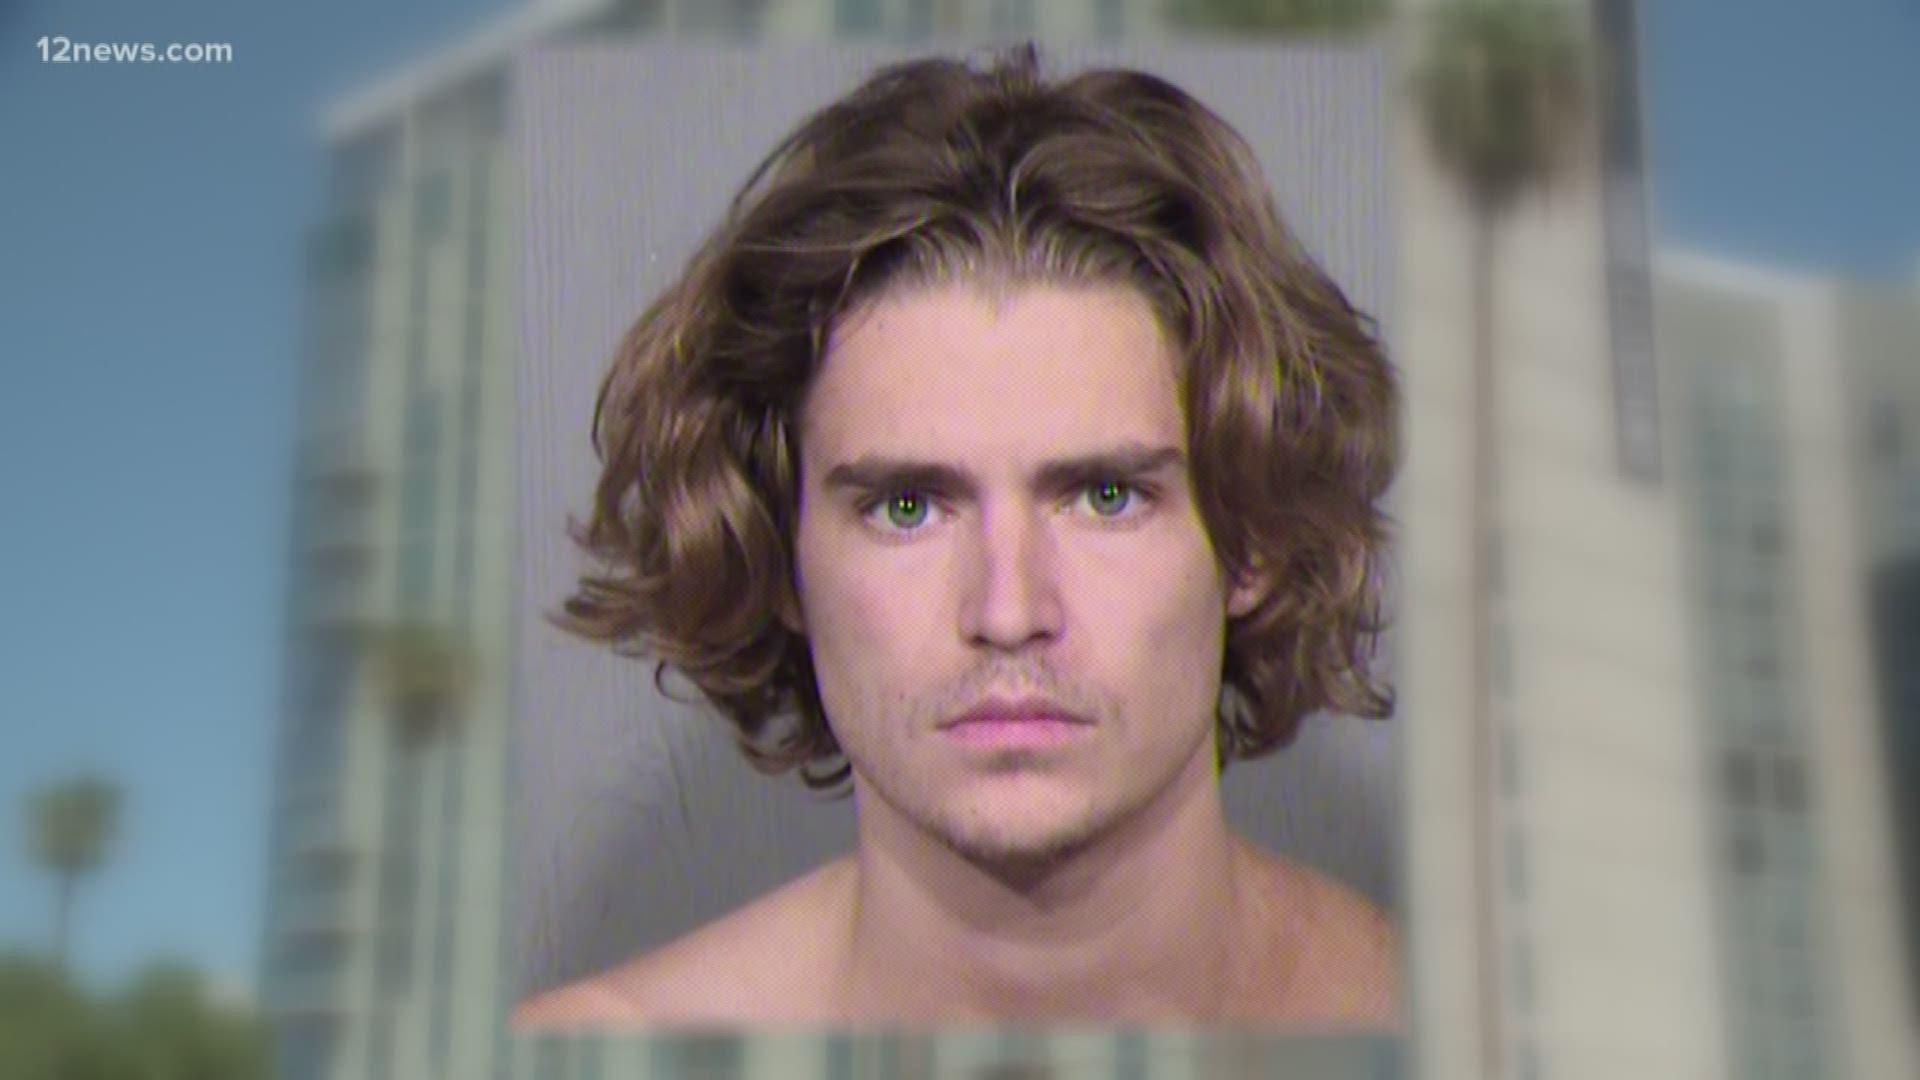 Nick Van Varenburg changed his plea to guilty after being arrested for a fight with his roommate at his Tempe apartment. He will be sentenced in October.